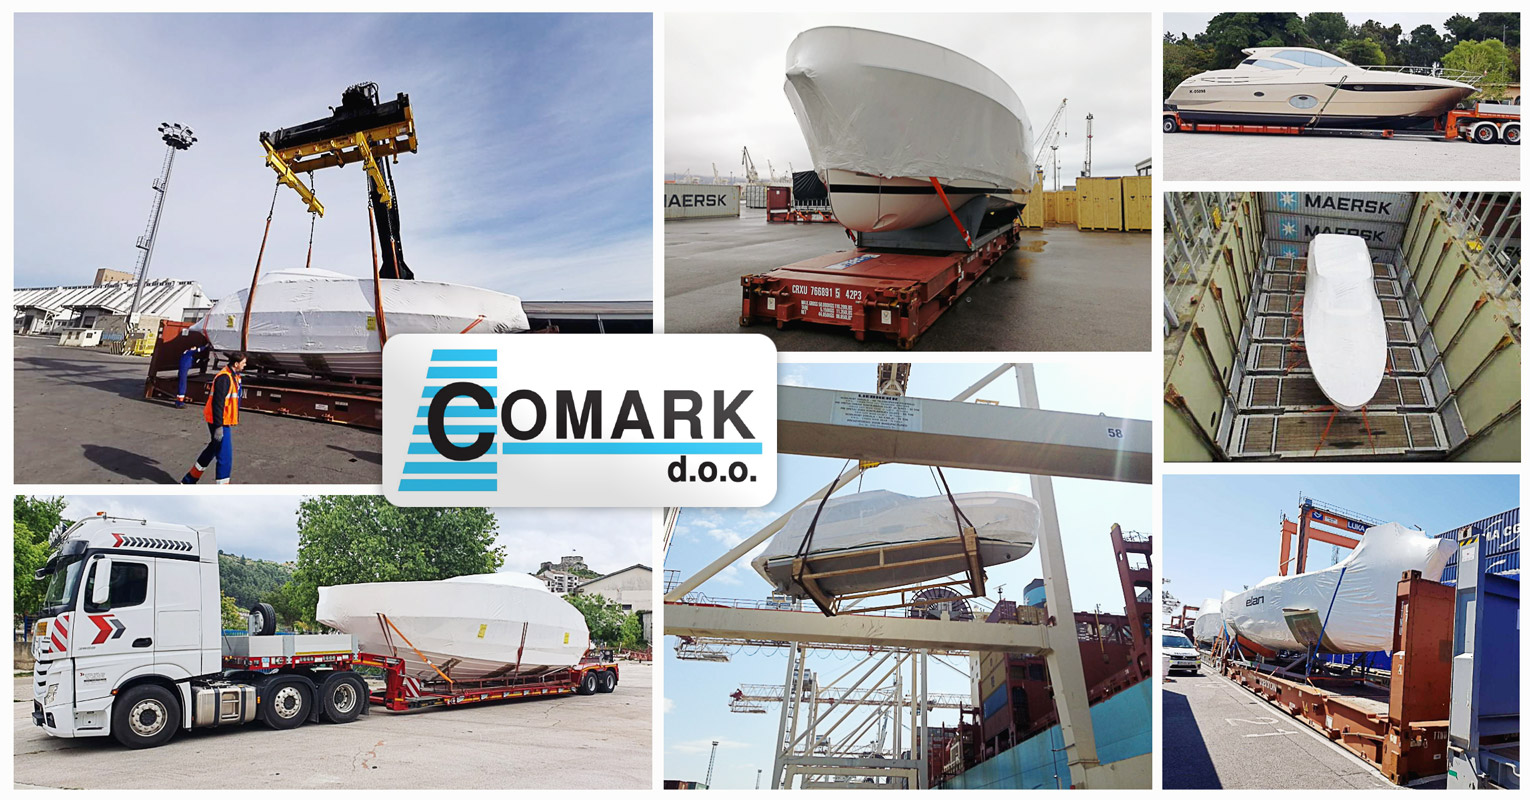 Comark is Moving Yachts and Sailboats for New Owners All Over the World